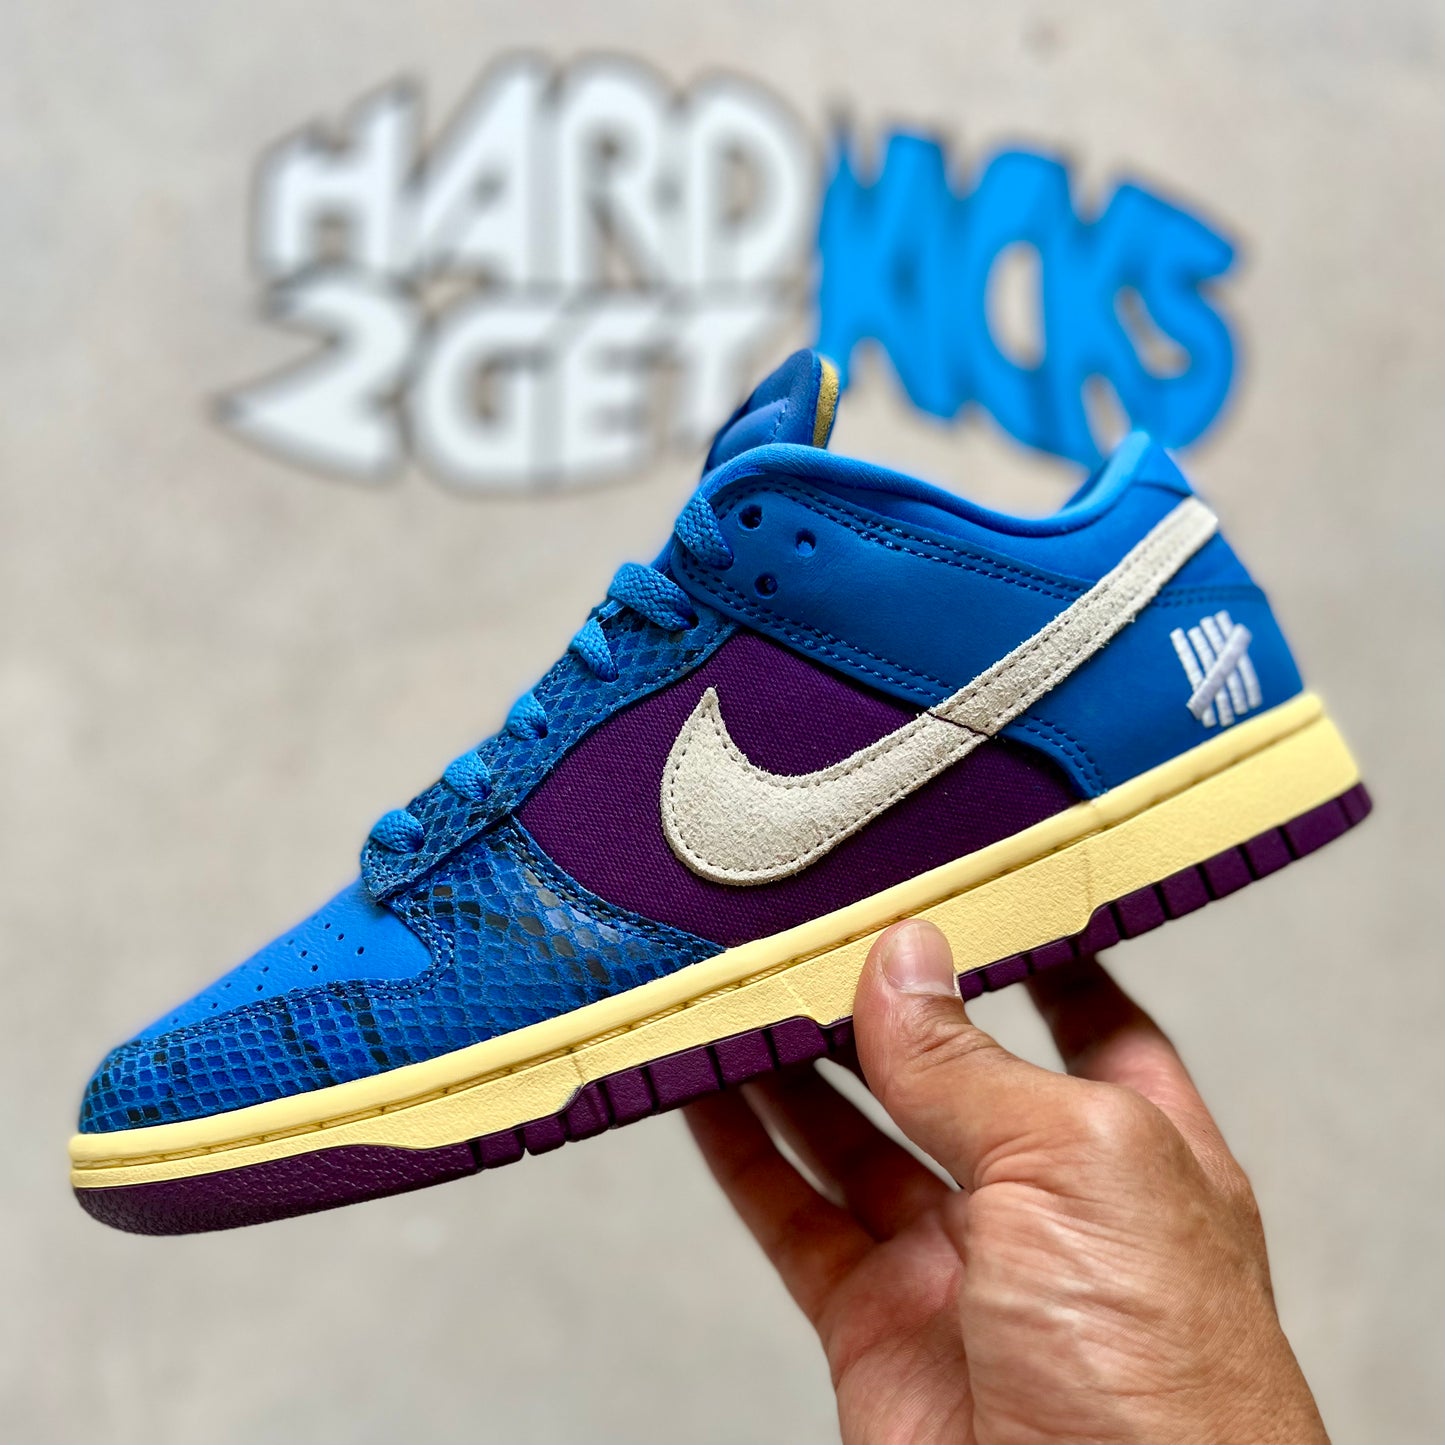 Nike Dunk Low SP - Undefeated “5 On It”